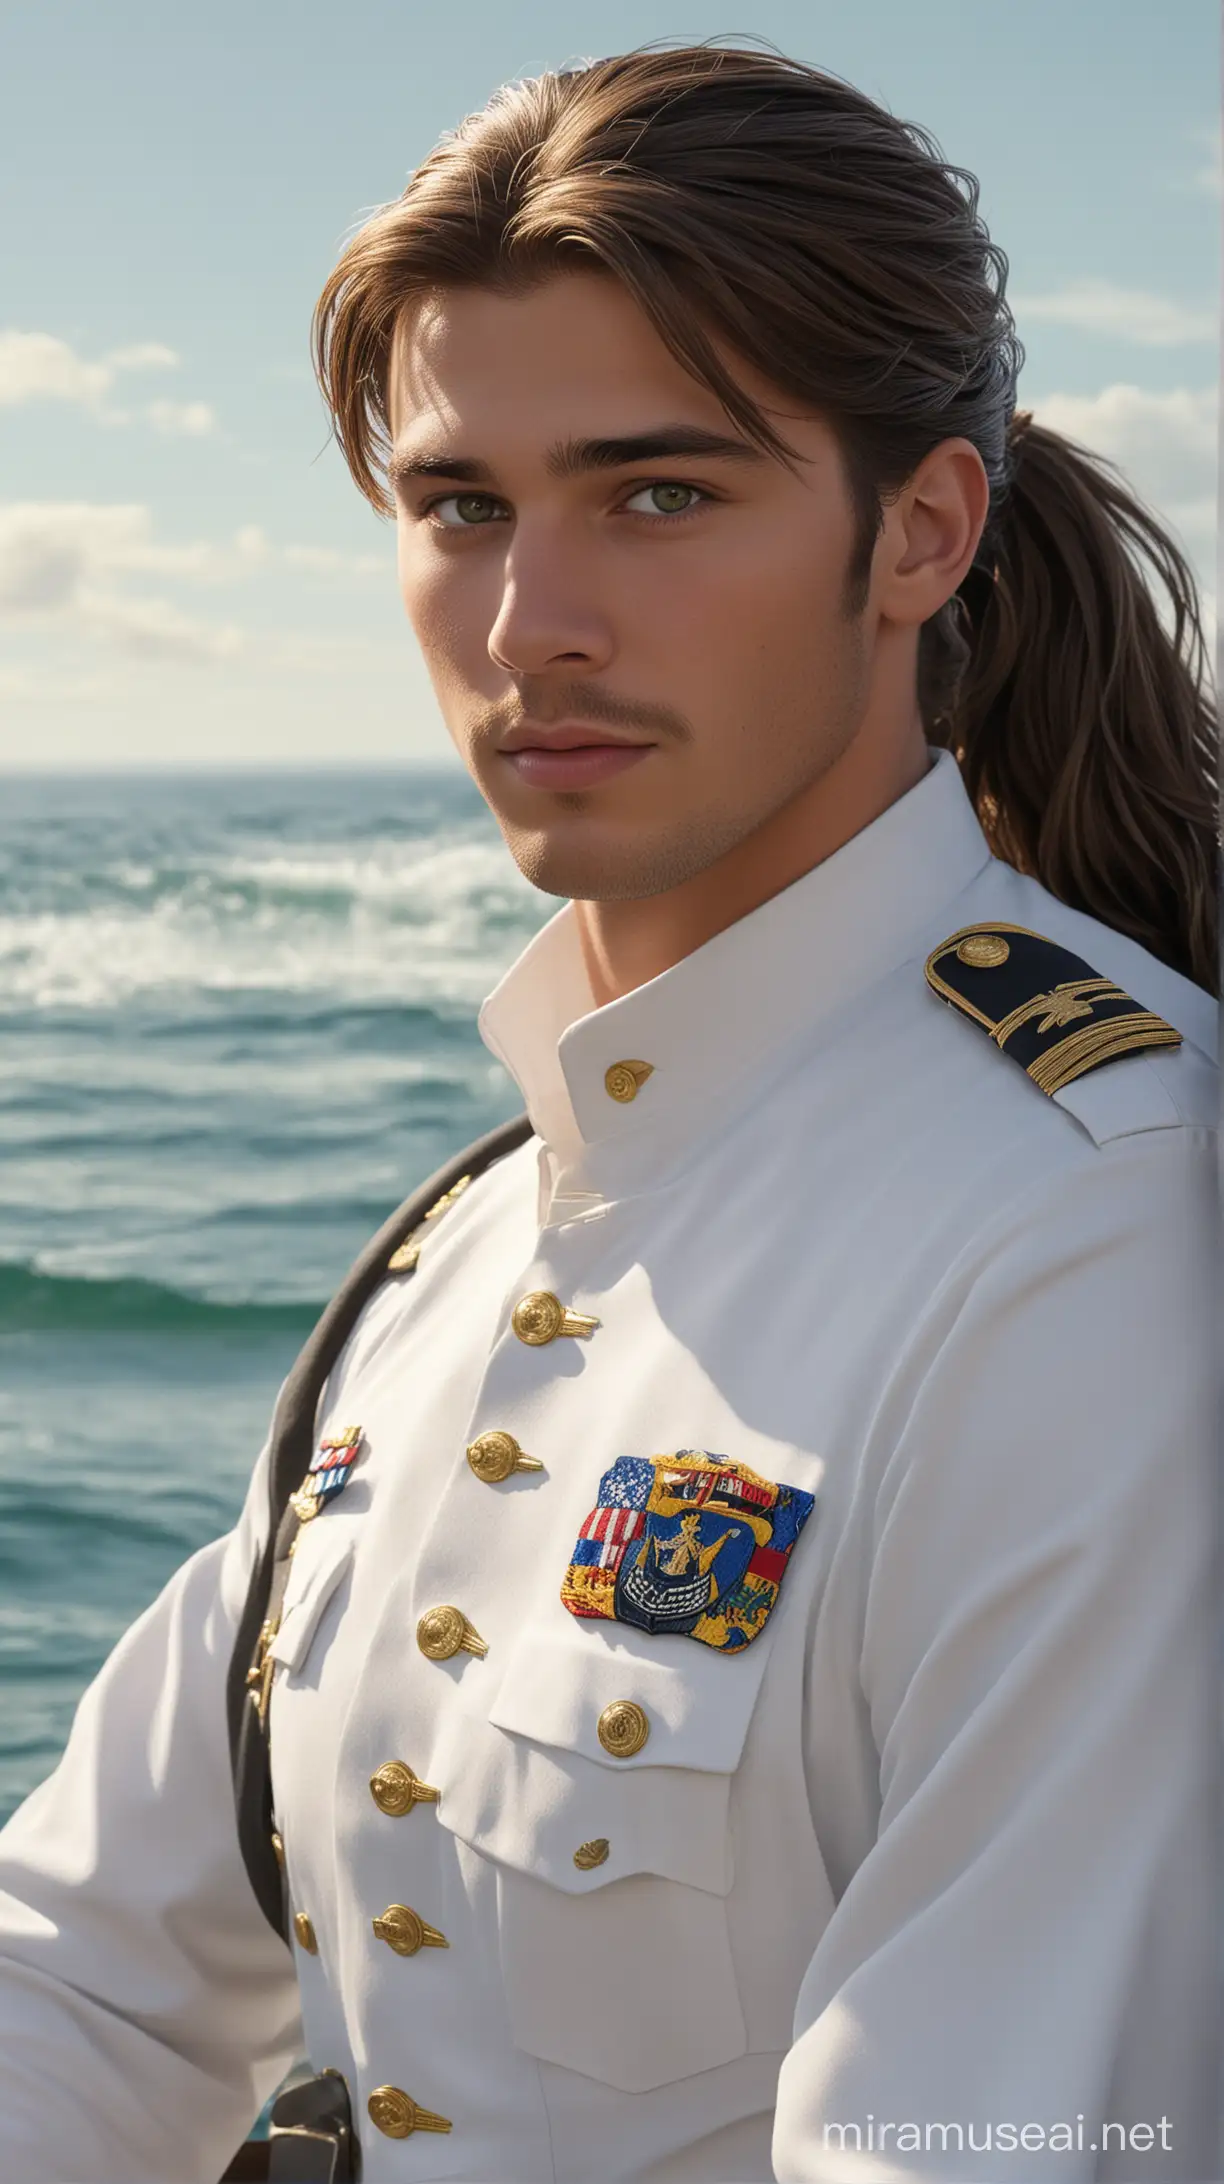 Disney Prince John Rolf in Navy Military Uniform Against Natural Background